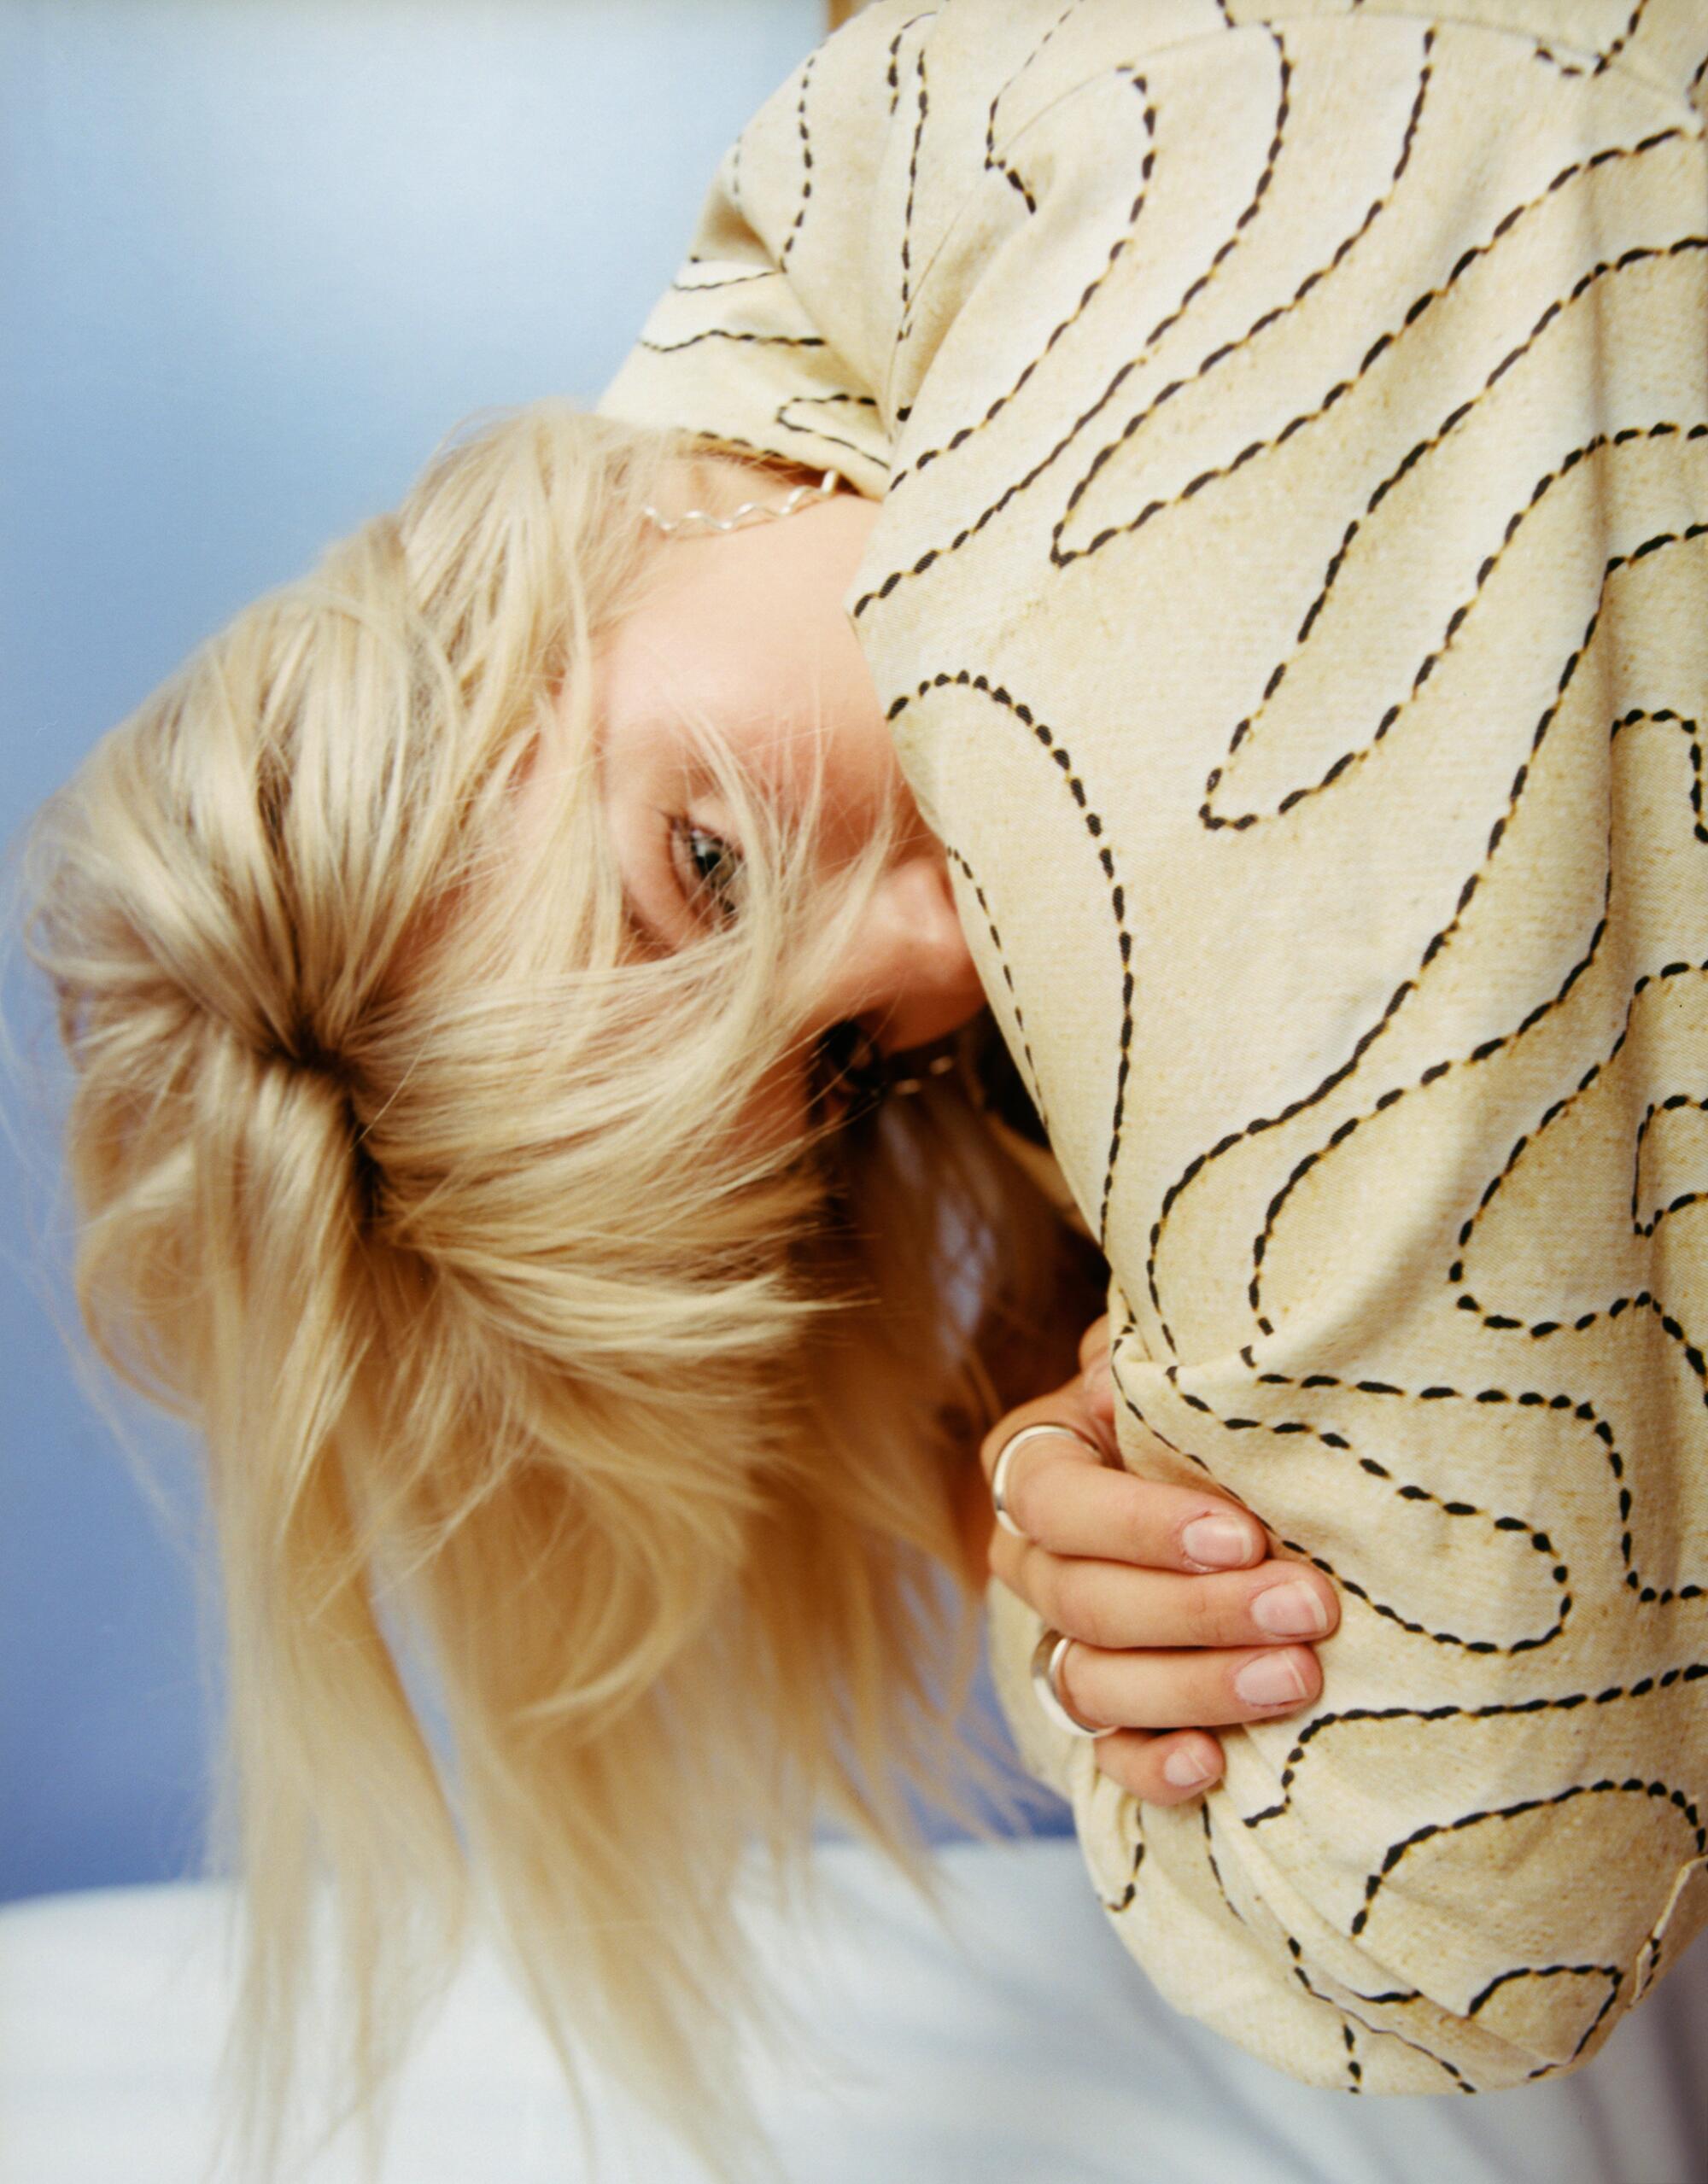 Reneé Rapp bends over with her head down as blond hair obscures her face and a patterned shirt hides her mouth